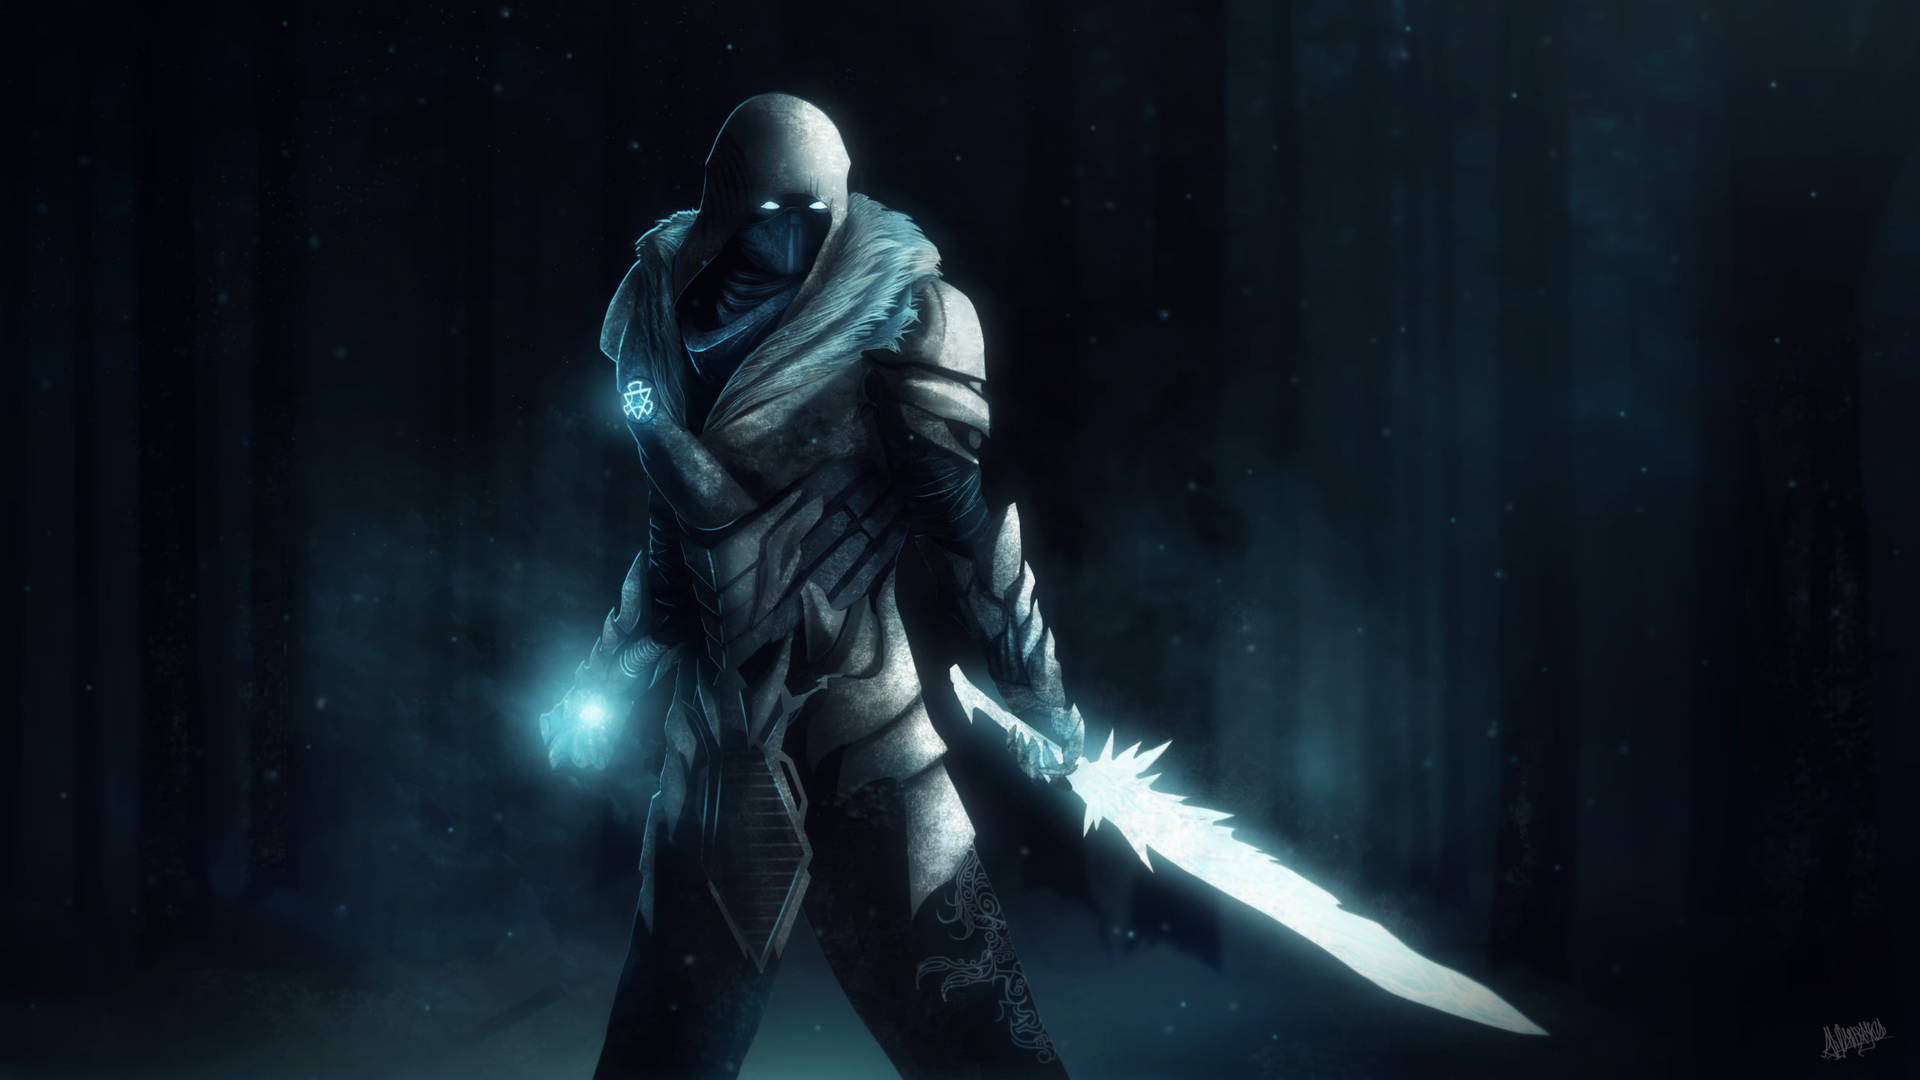 Sub-zero With Sword In Forest